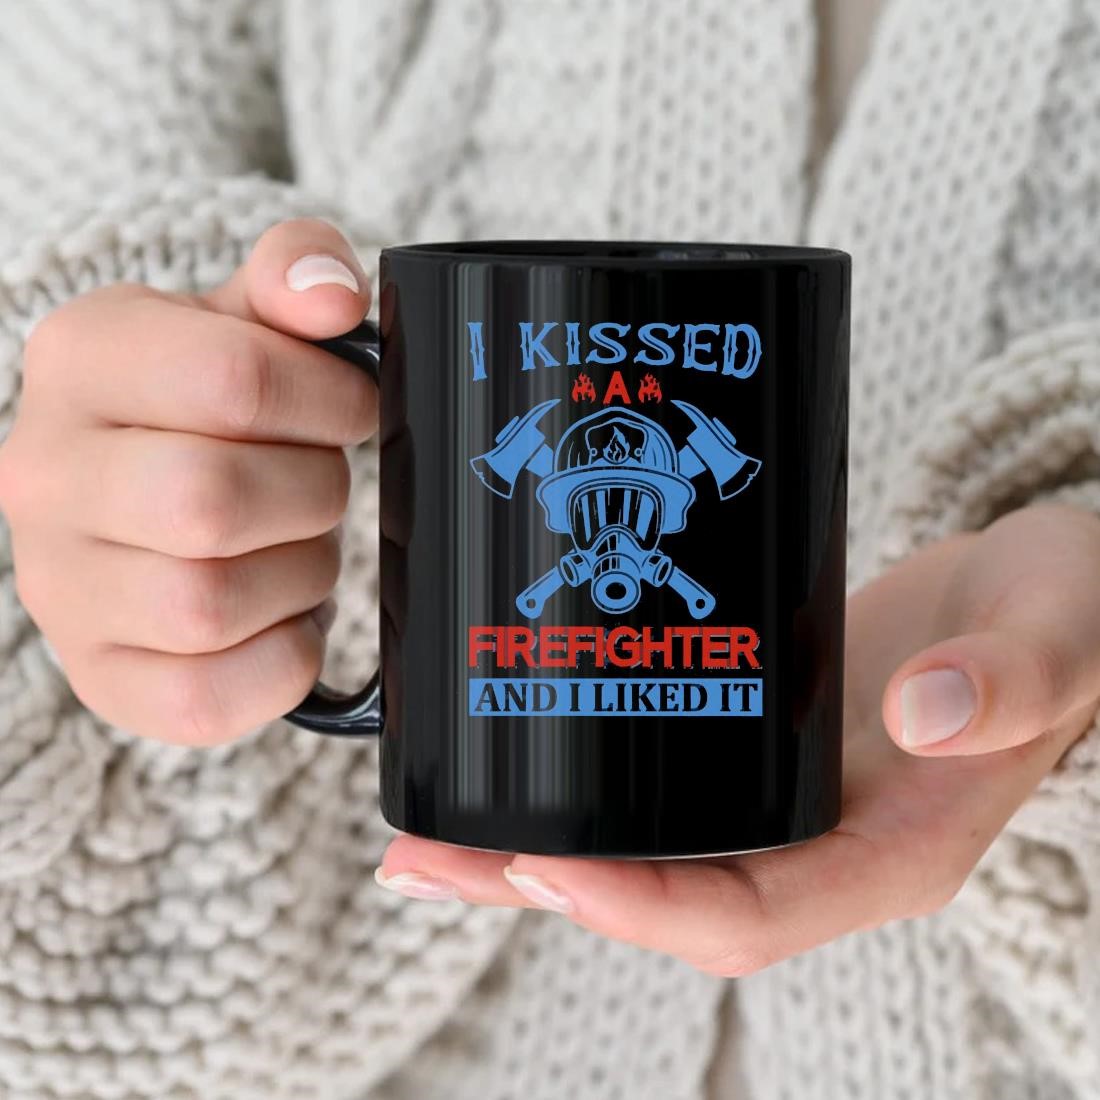 I Kissed A Firefighter And I Liked It Mug